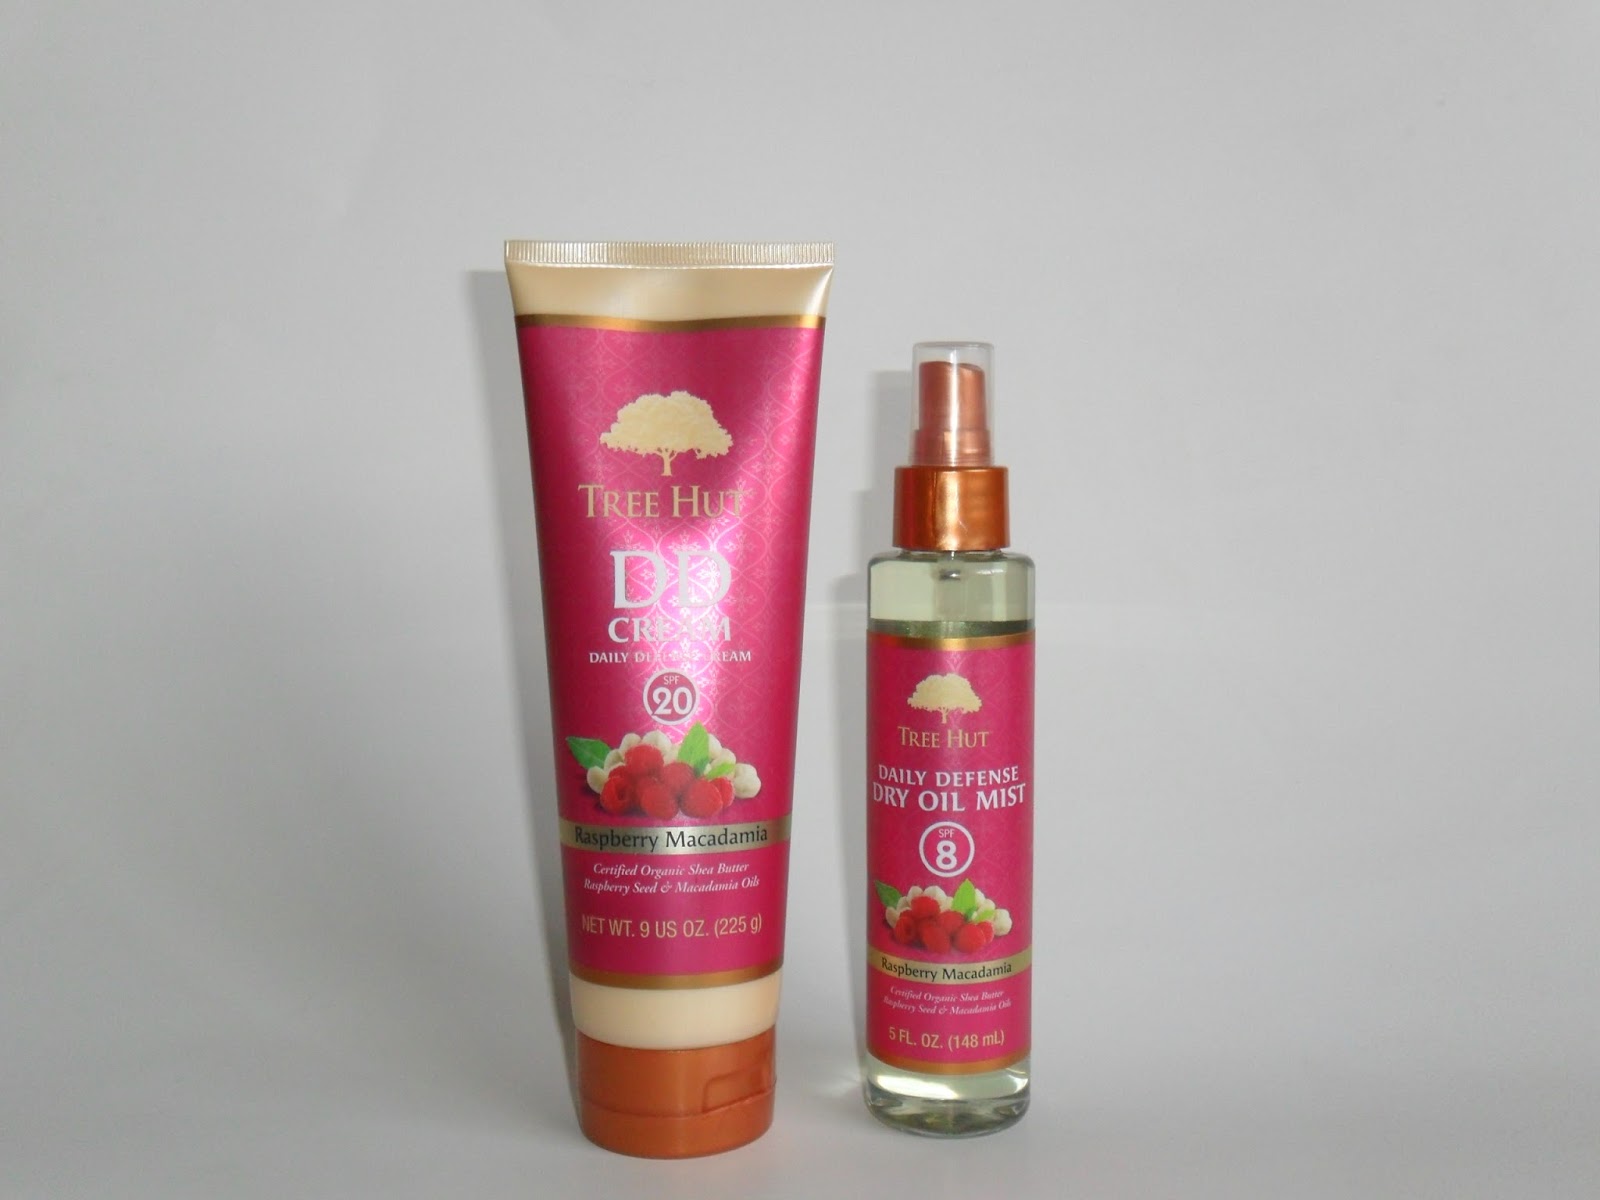 Tree Hut Daily Defense Raspberry Macadamia: Dry Oil Myst and Body Lotion Review.